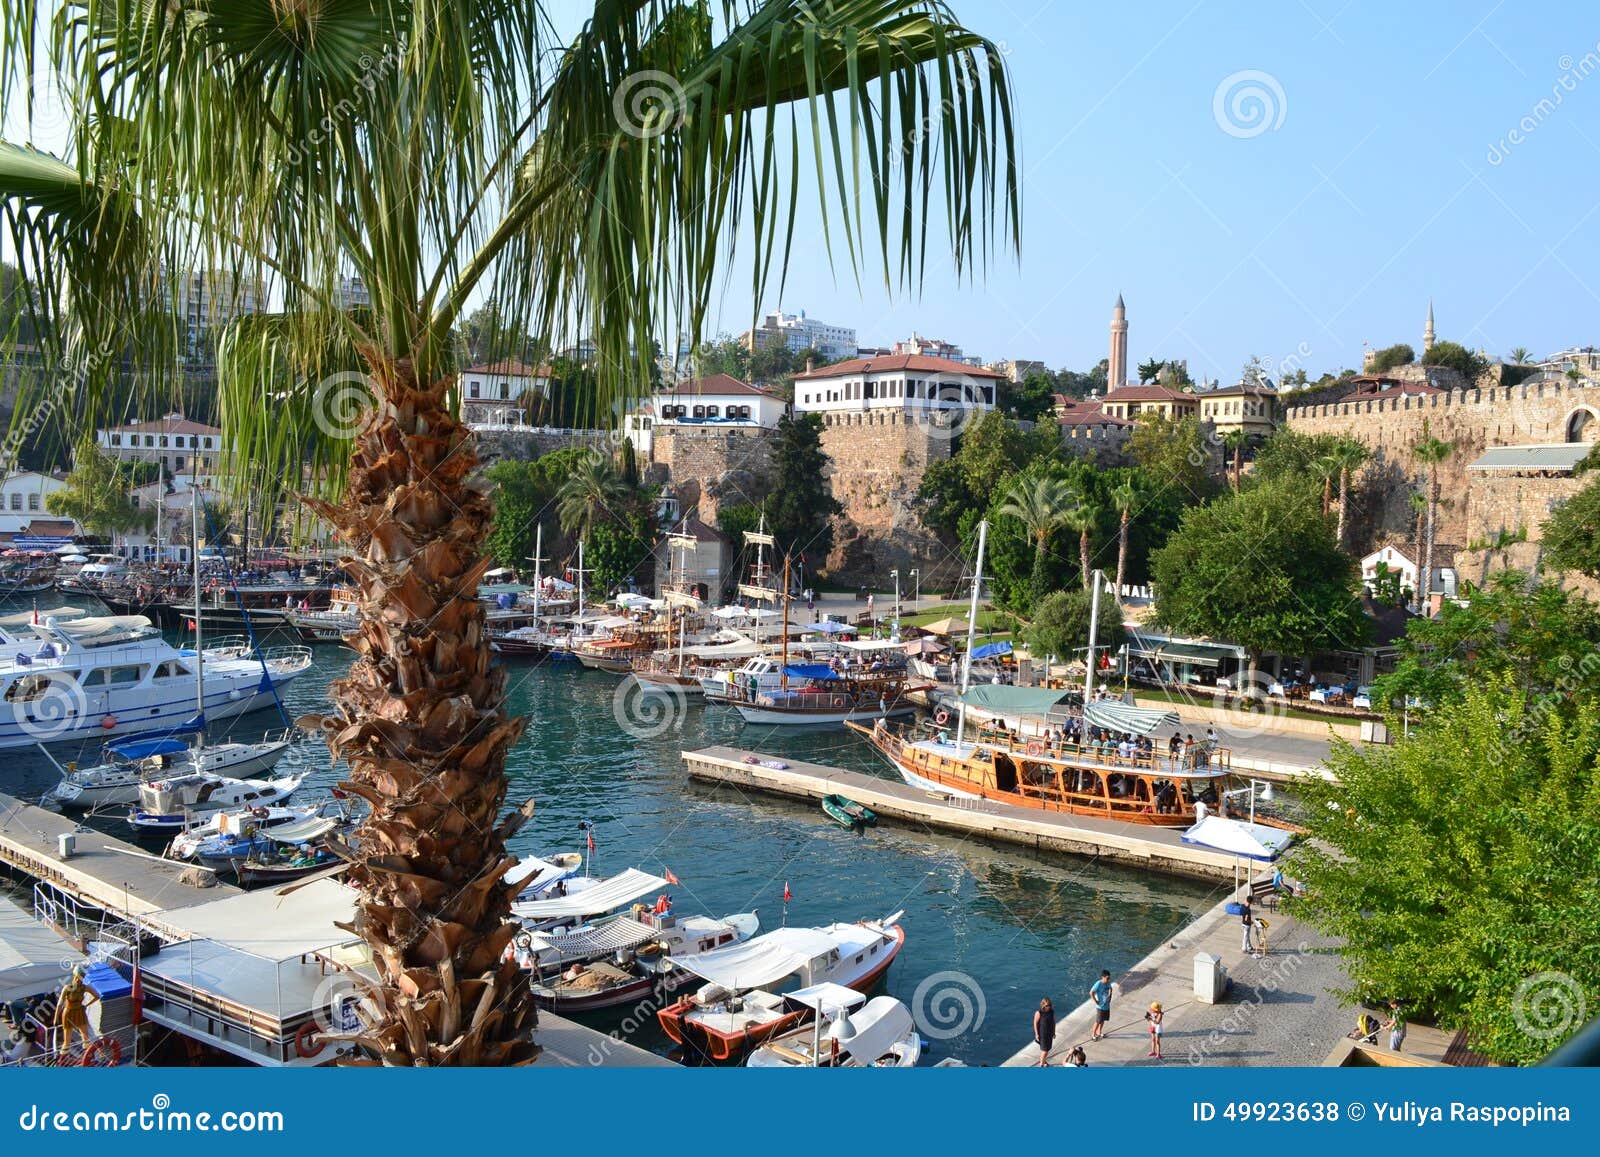 boats, a palm and a fortress in mediterranean sea in the port antalia